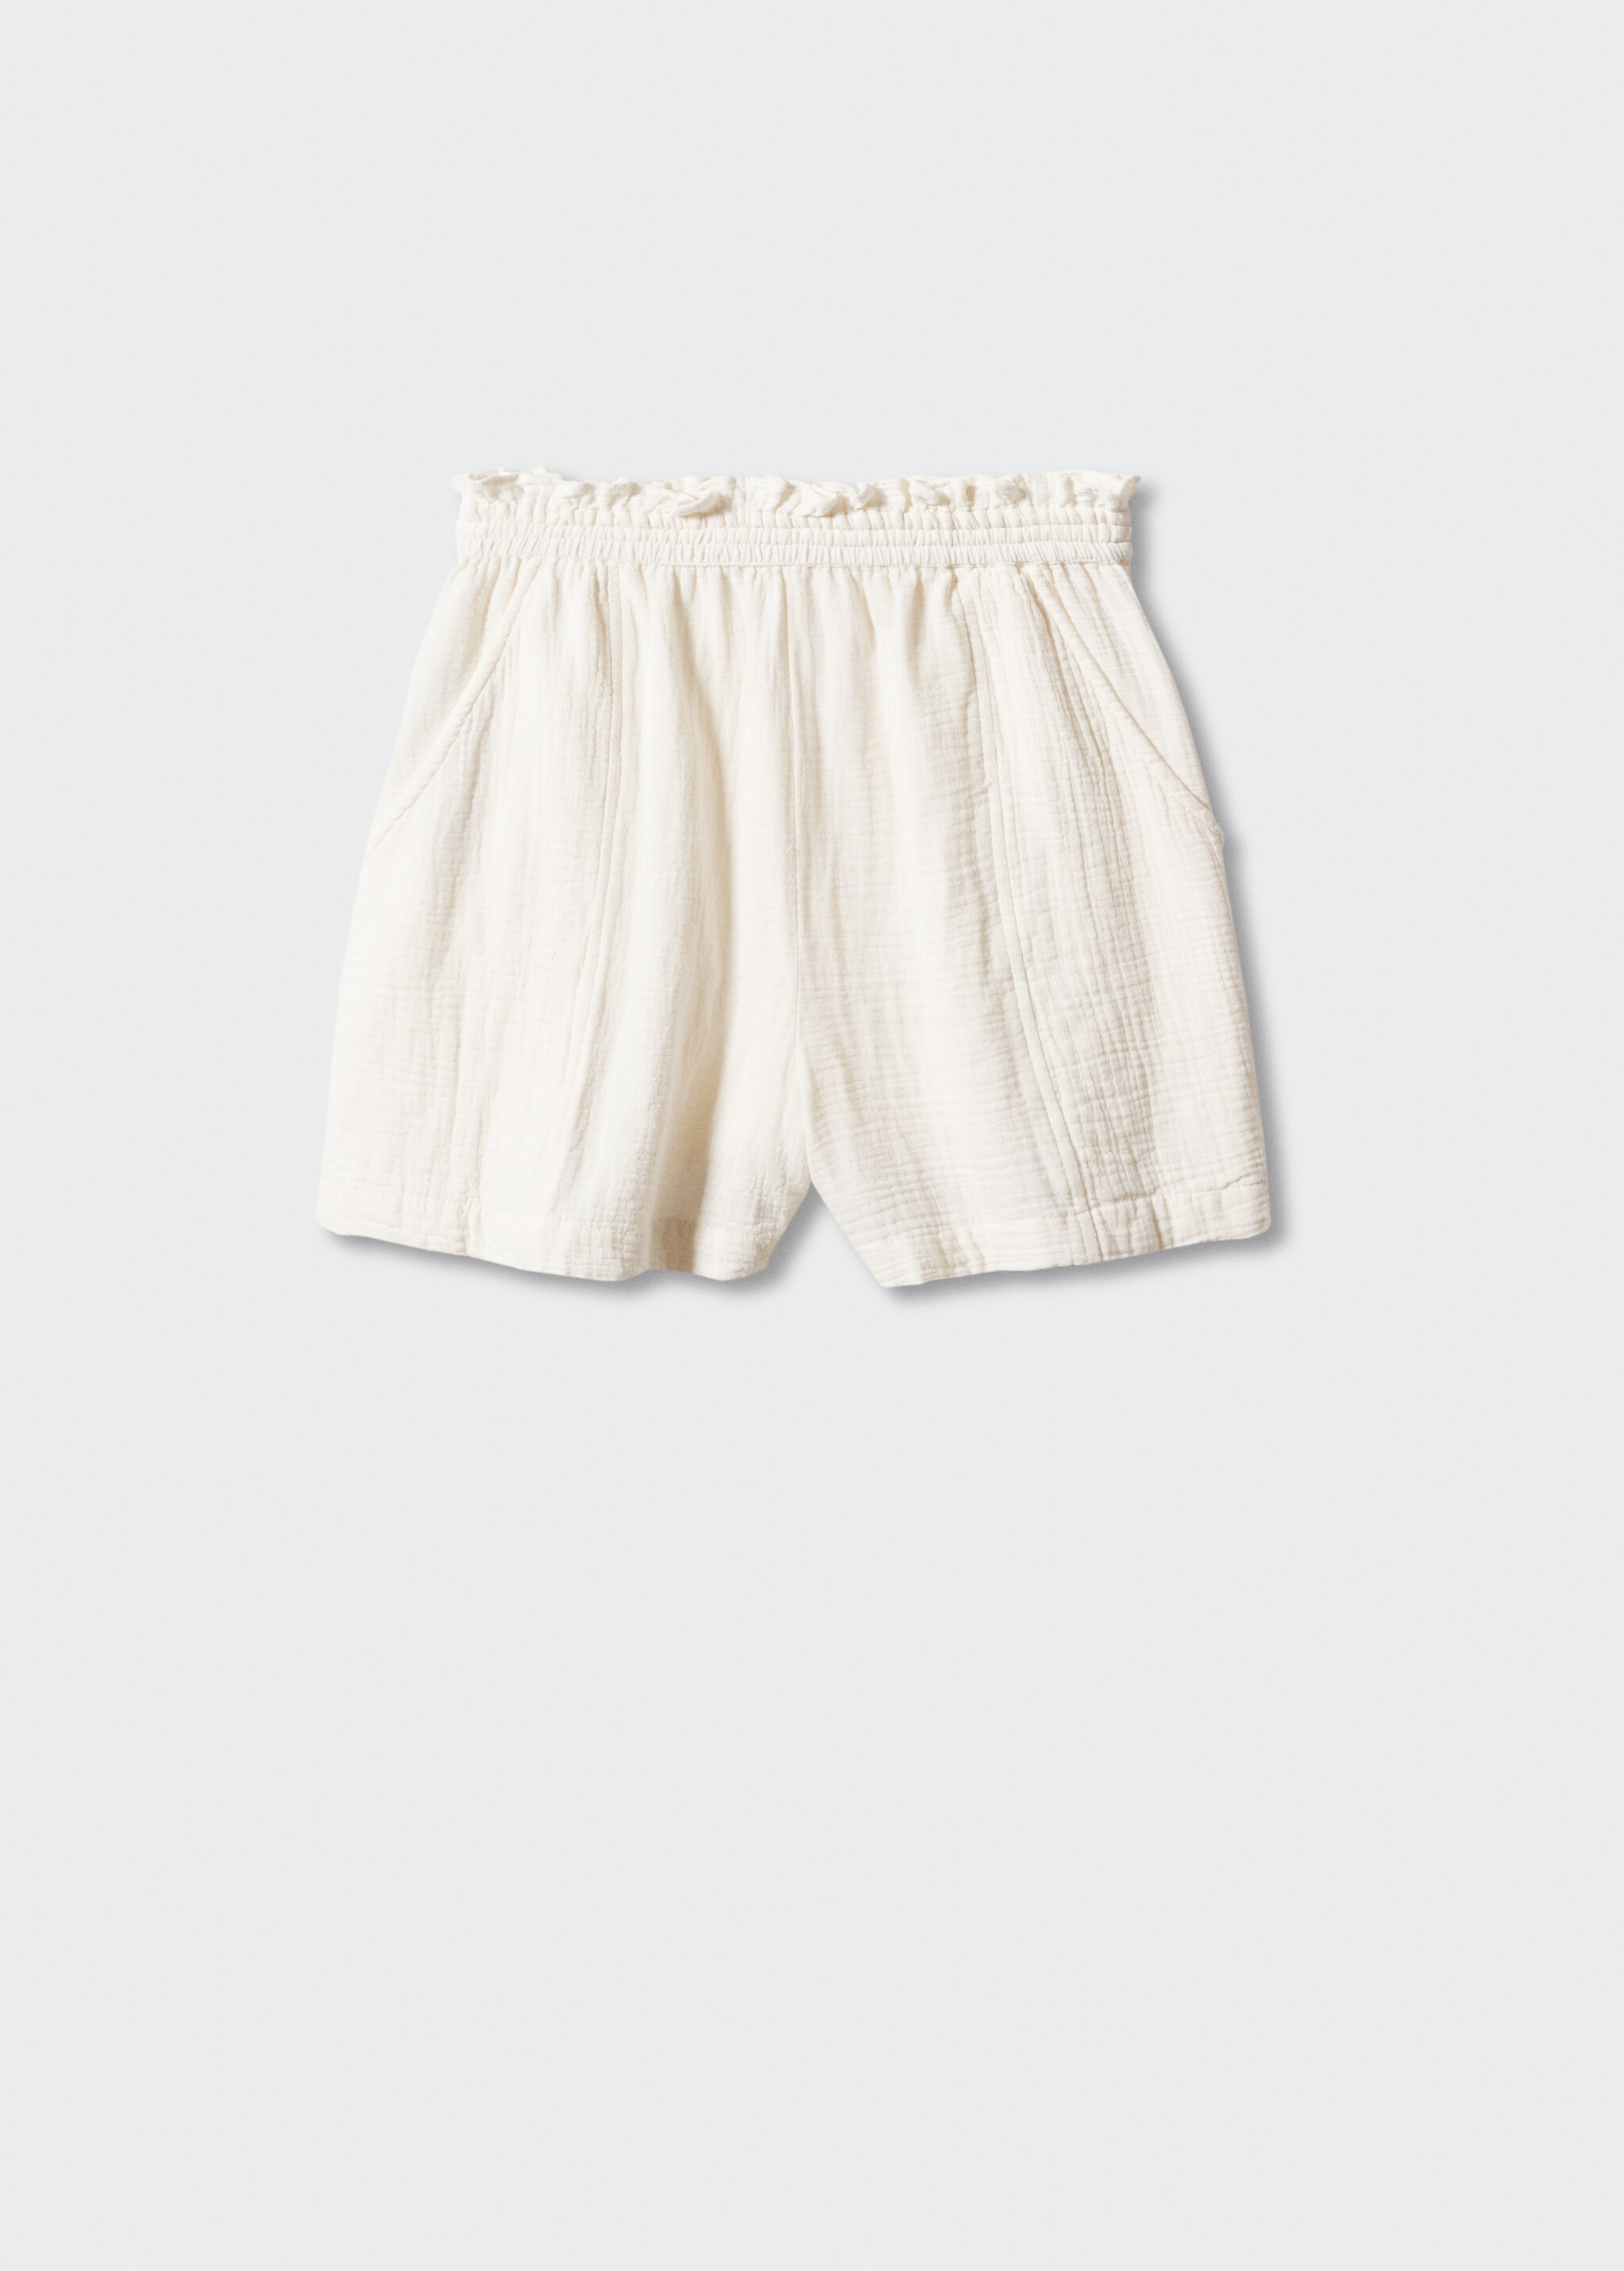 Paperbag textured shorts - Article without model